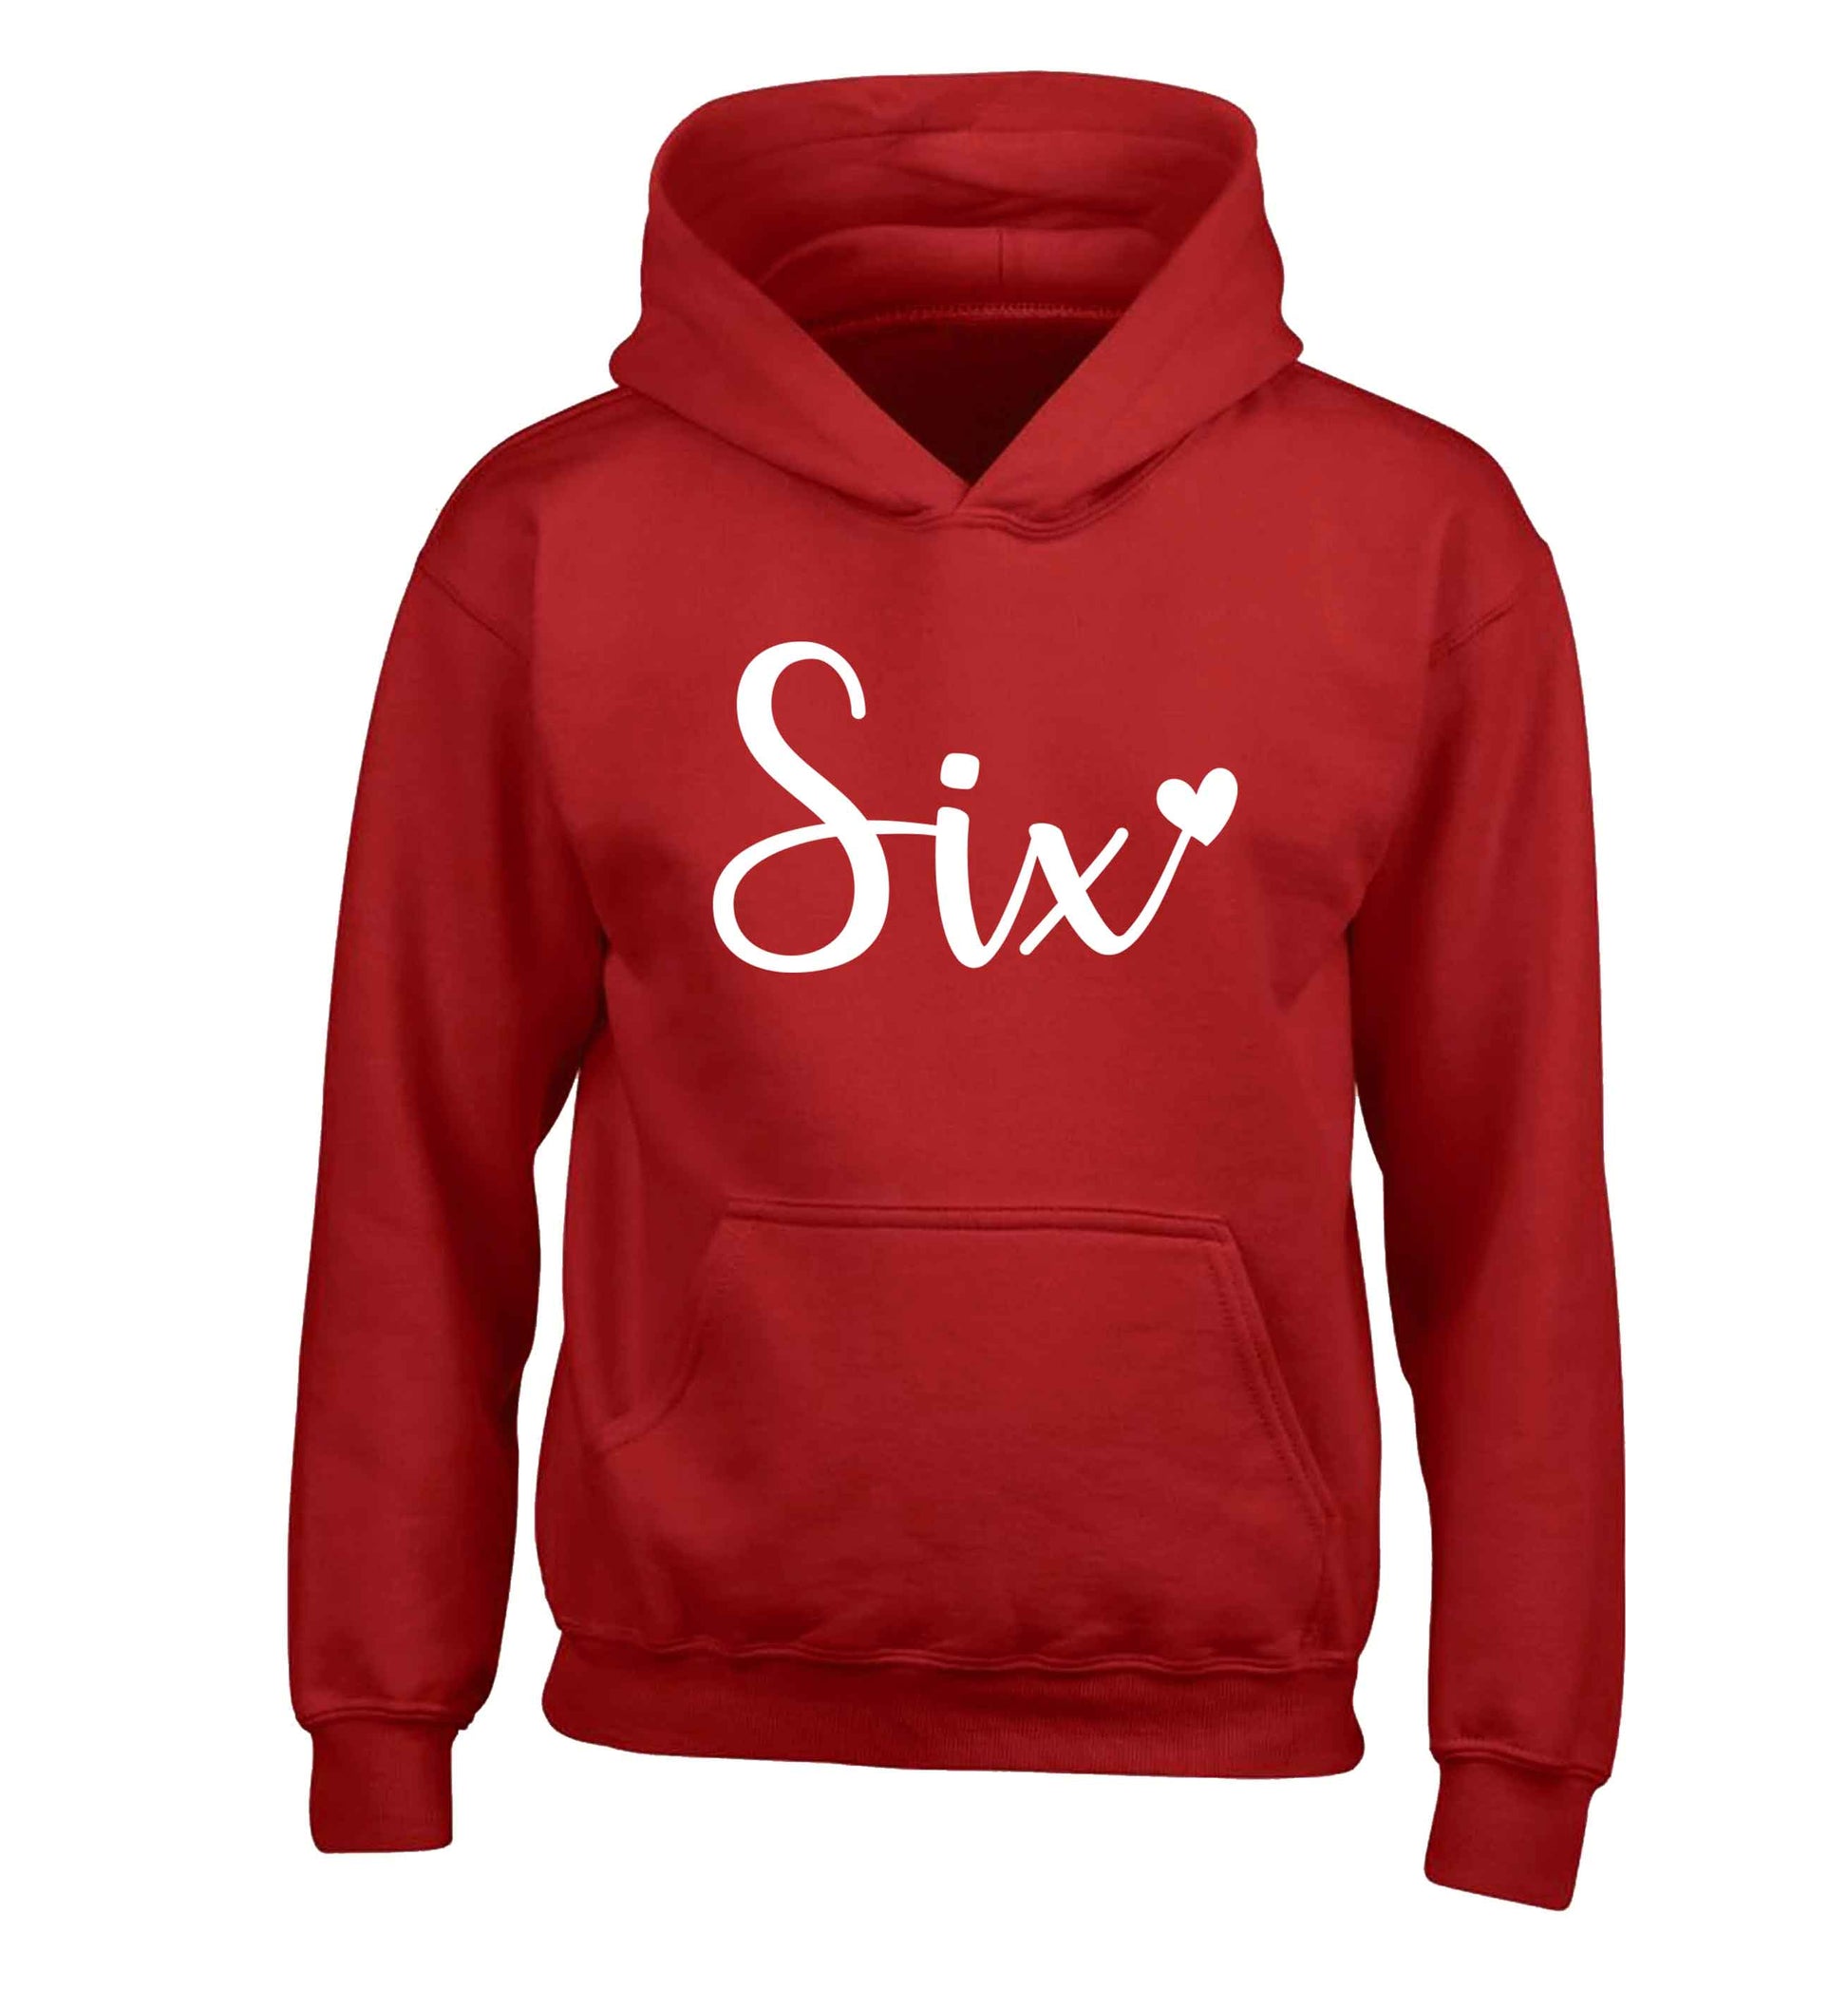 Six and heart! children's red hoodie 12-13 Years